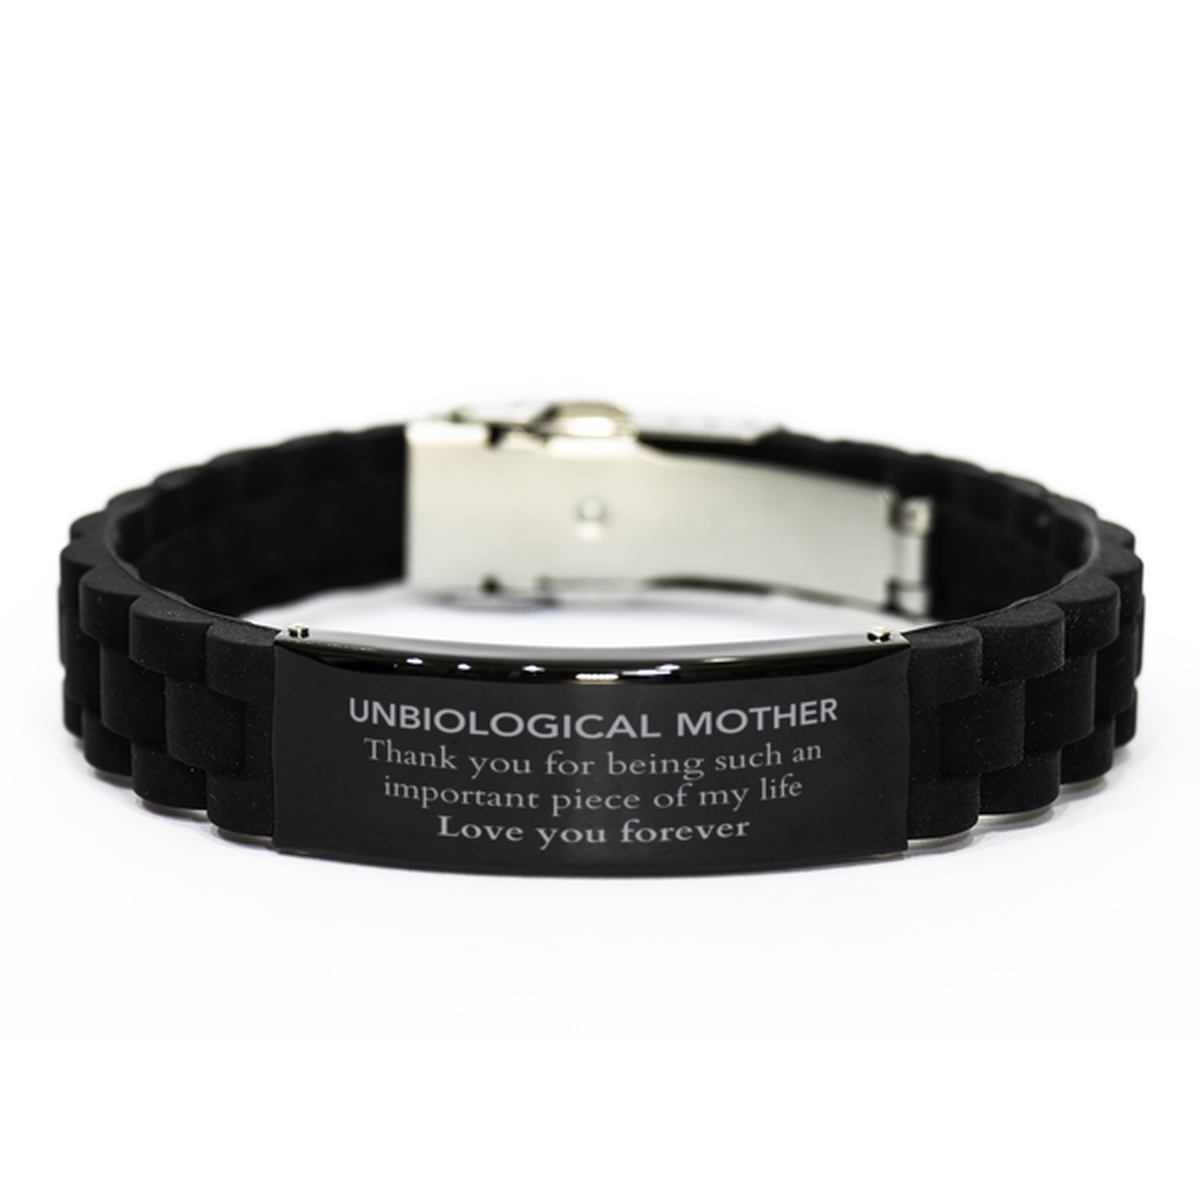 Appropriate Unbiological Mother Black Glidelock Clasp Bracelet Epic Birthday Gifts for Unbiological Mother Thank you for being such an important piece of my life Unbiological Mother Christmas Mothers Fathers Day